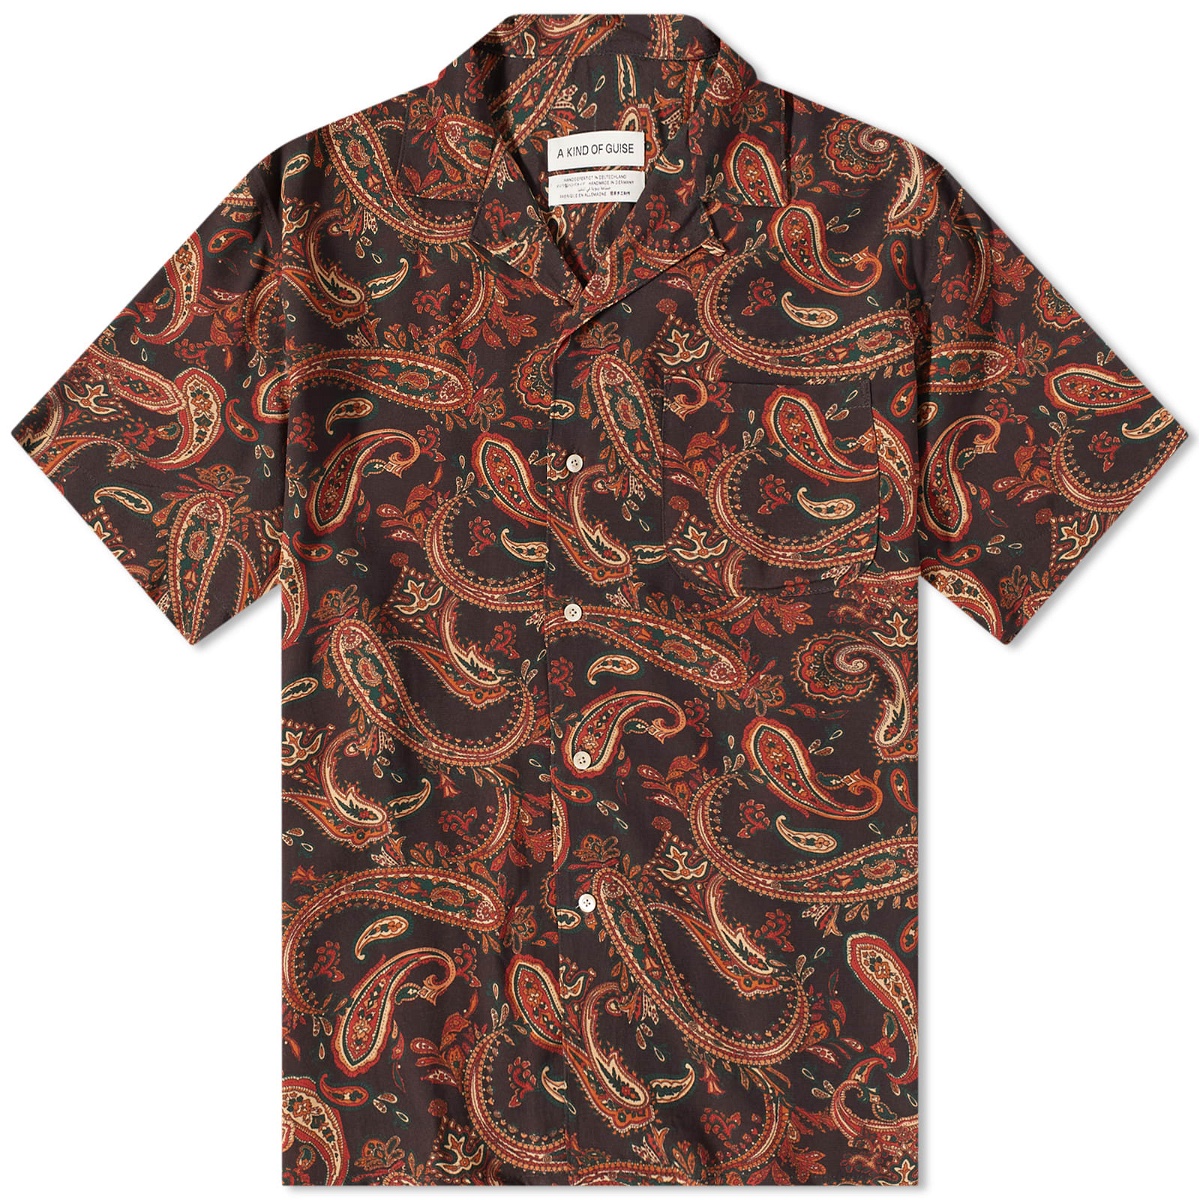 Photo: A Kind of Guise Men's Gioia Shirt in Petra Paisley